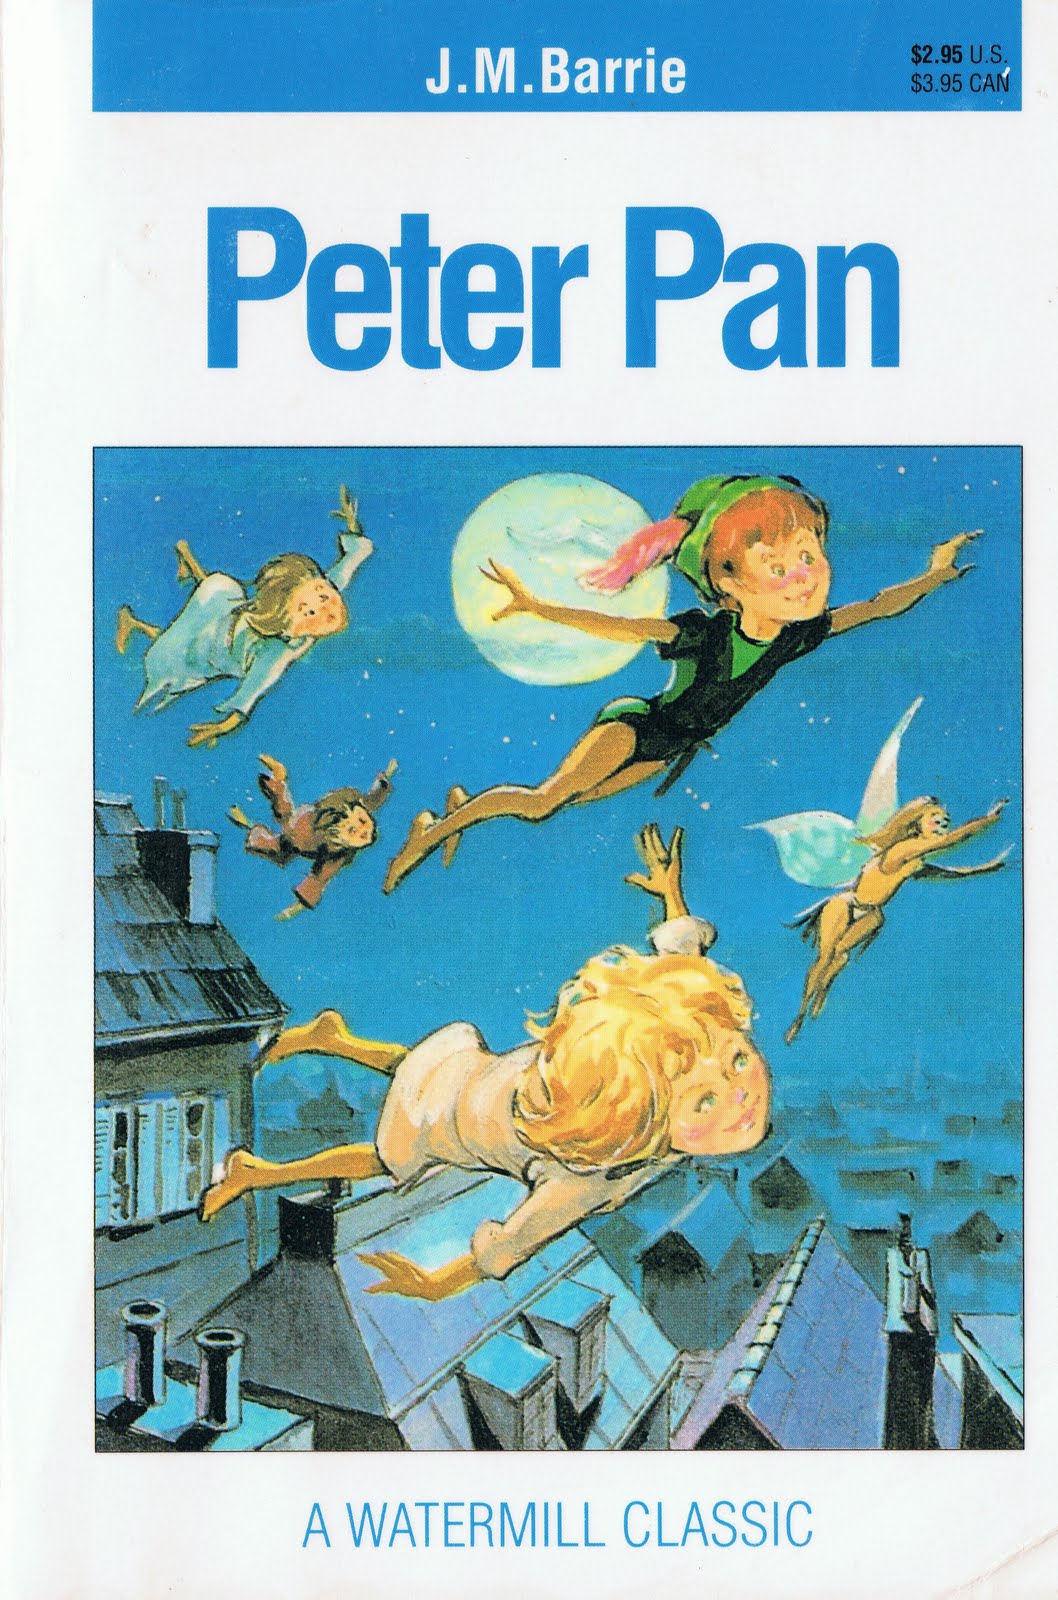 Little Library of Rescued Books: Peter Pan by J.M.Barrie